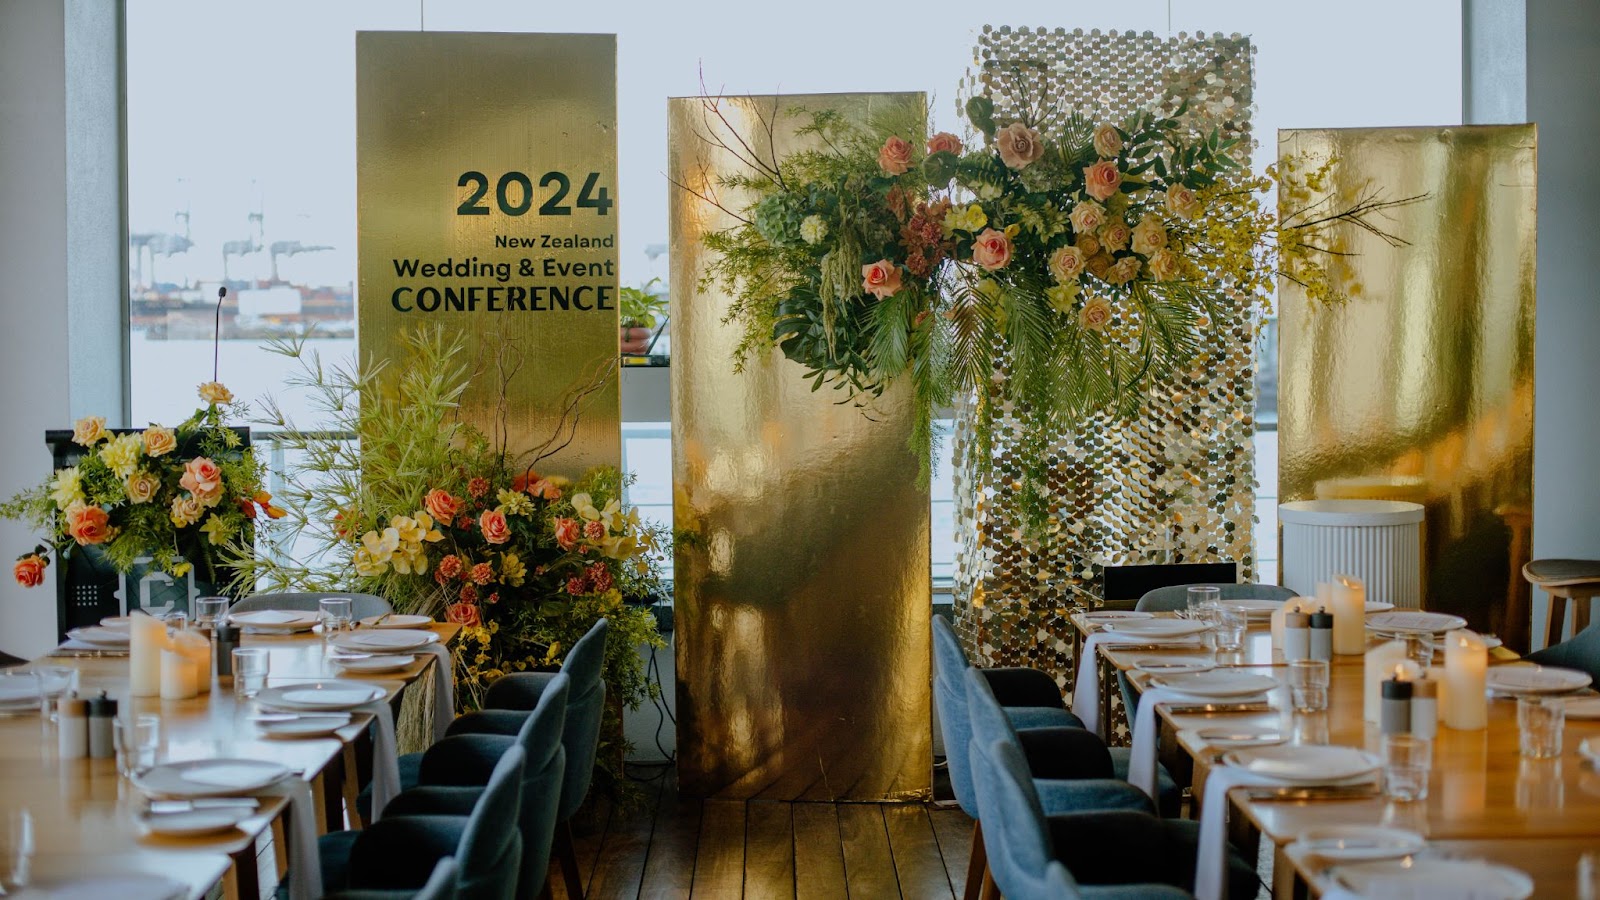 New Zealand Wedding & Event Conference 2024 at Hilton Auckland